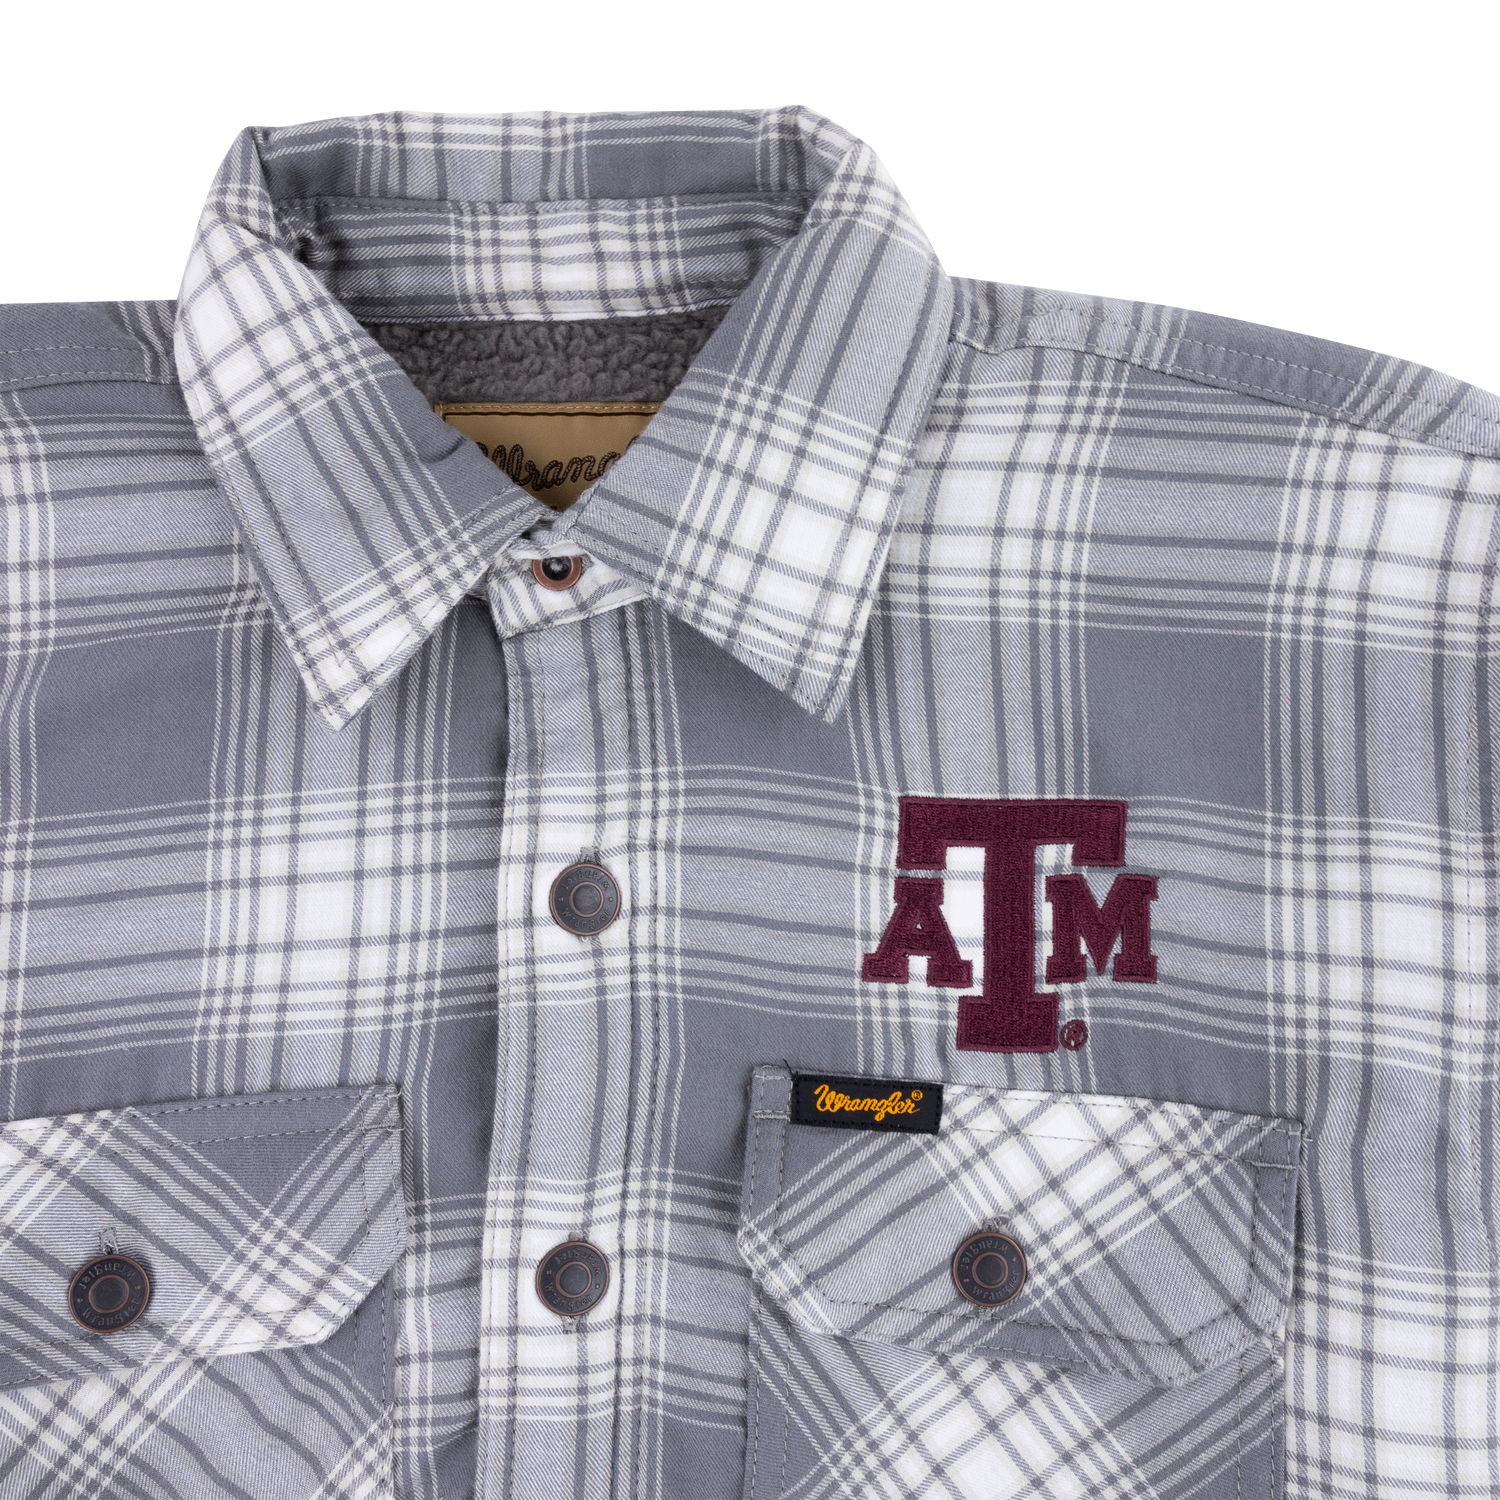 Texas A&M Wrangler Authentic Sherpa Lined Flannel Shirt Jacket